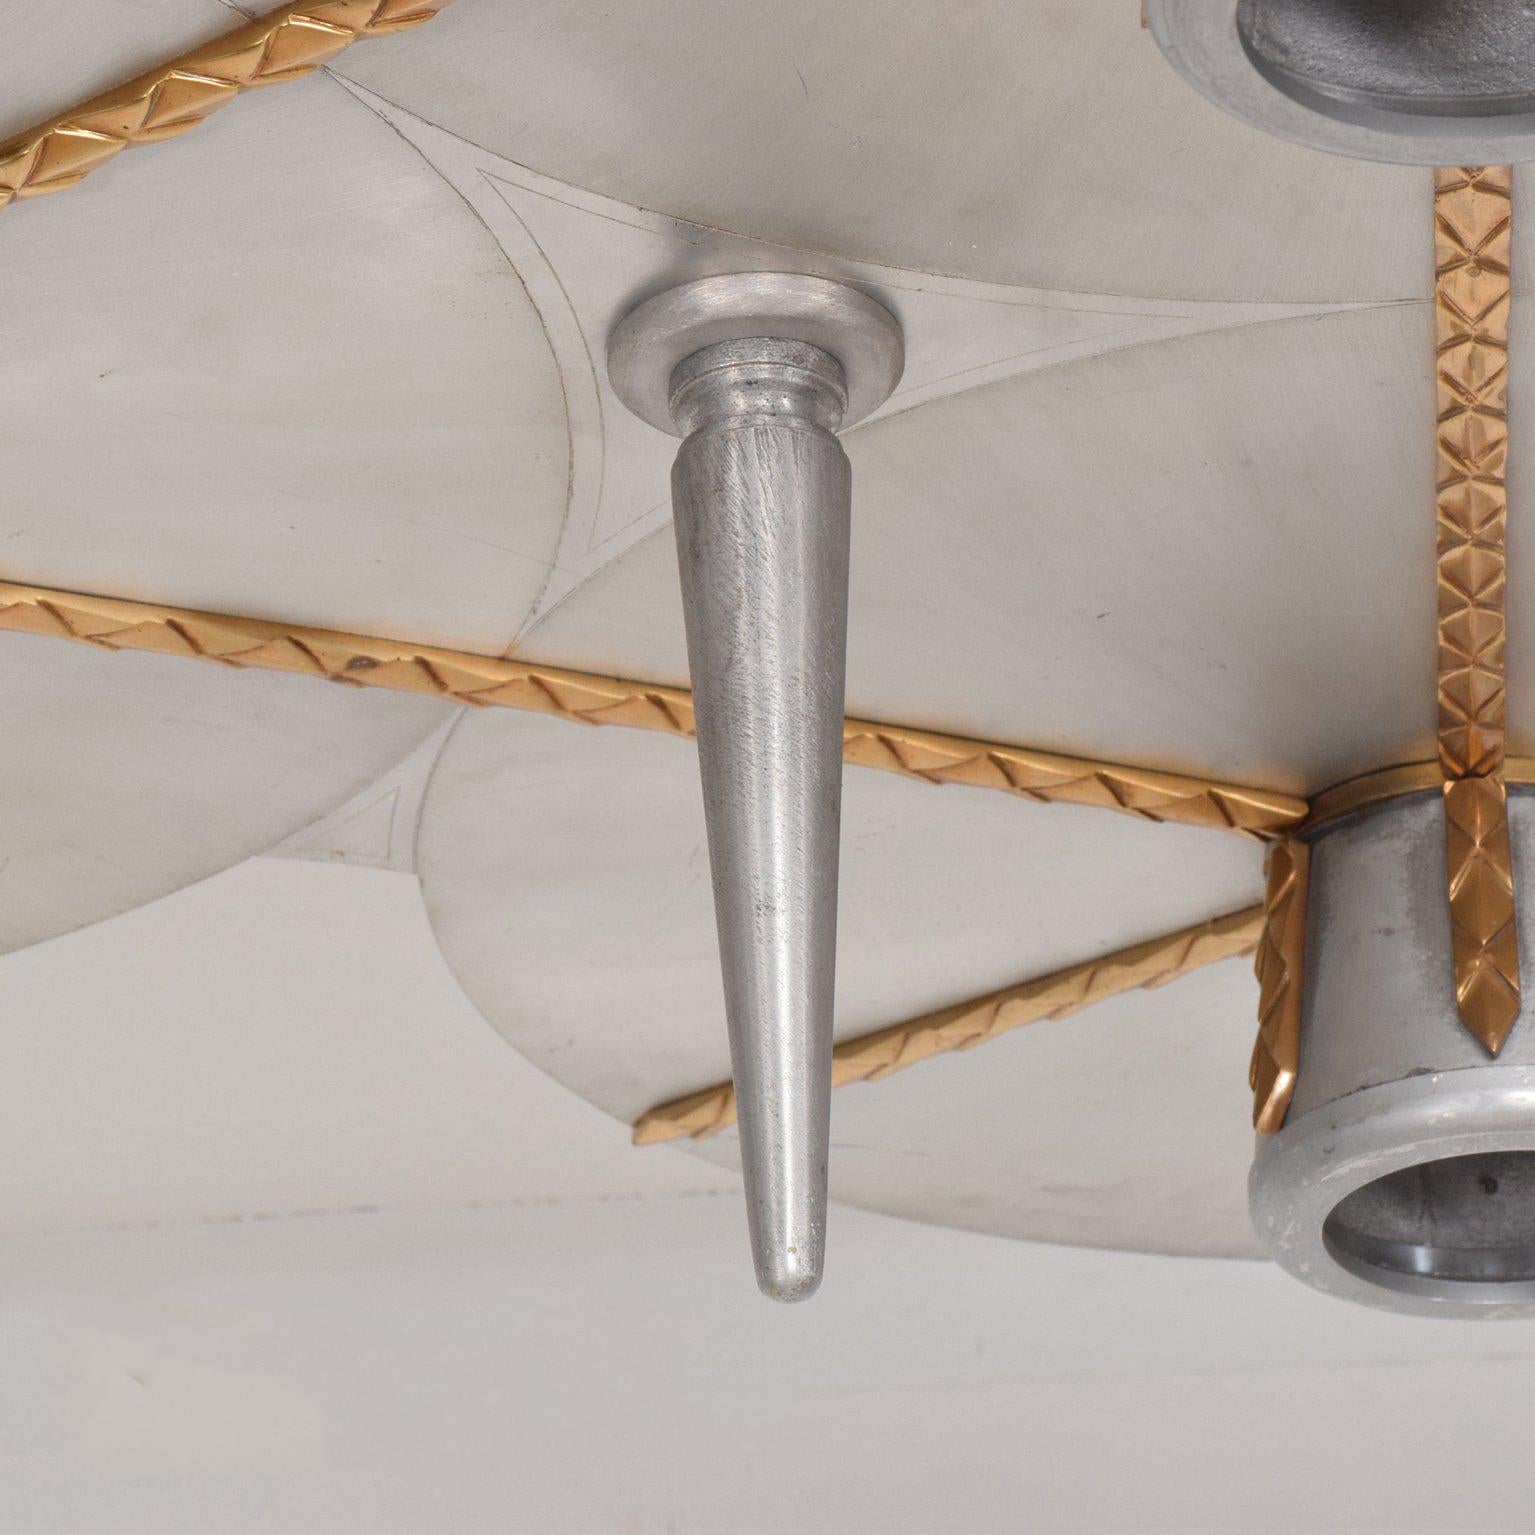 For your consideration a ceiling light fixture constructed of aluminum and bronze. 

Fixture requires to be mounted into the ceiling with six screws (not included).

Beautiful well balanced design of three circles. The perfect trinity.